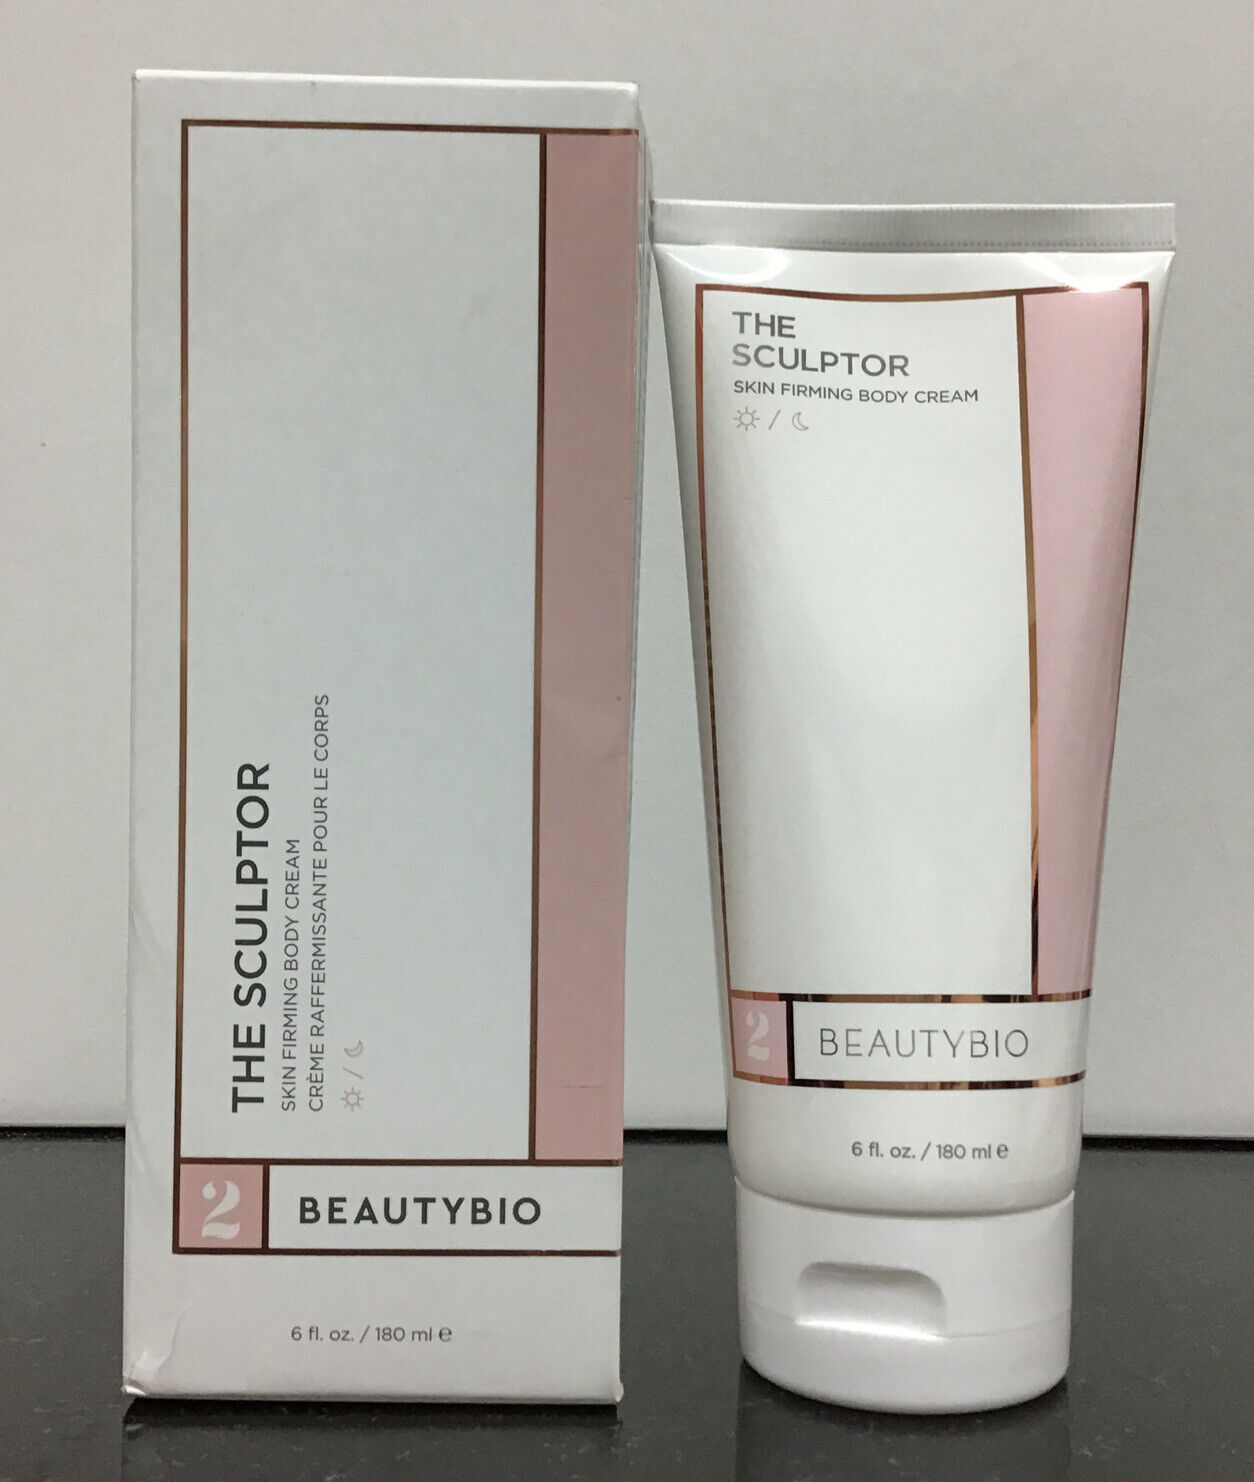 BeautyBio - The Sculptor - Skin Firming Body Cream - 6 Oz - ¡As pictured 